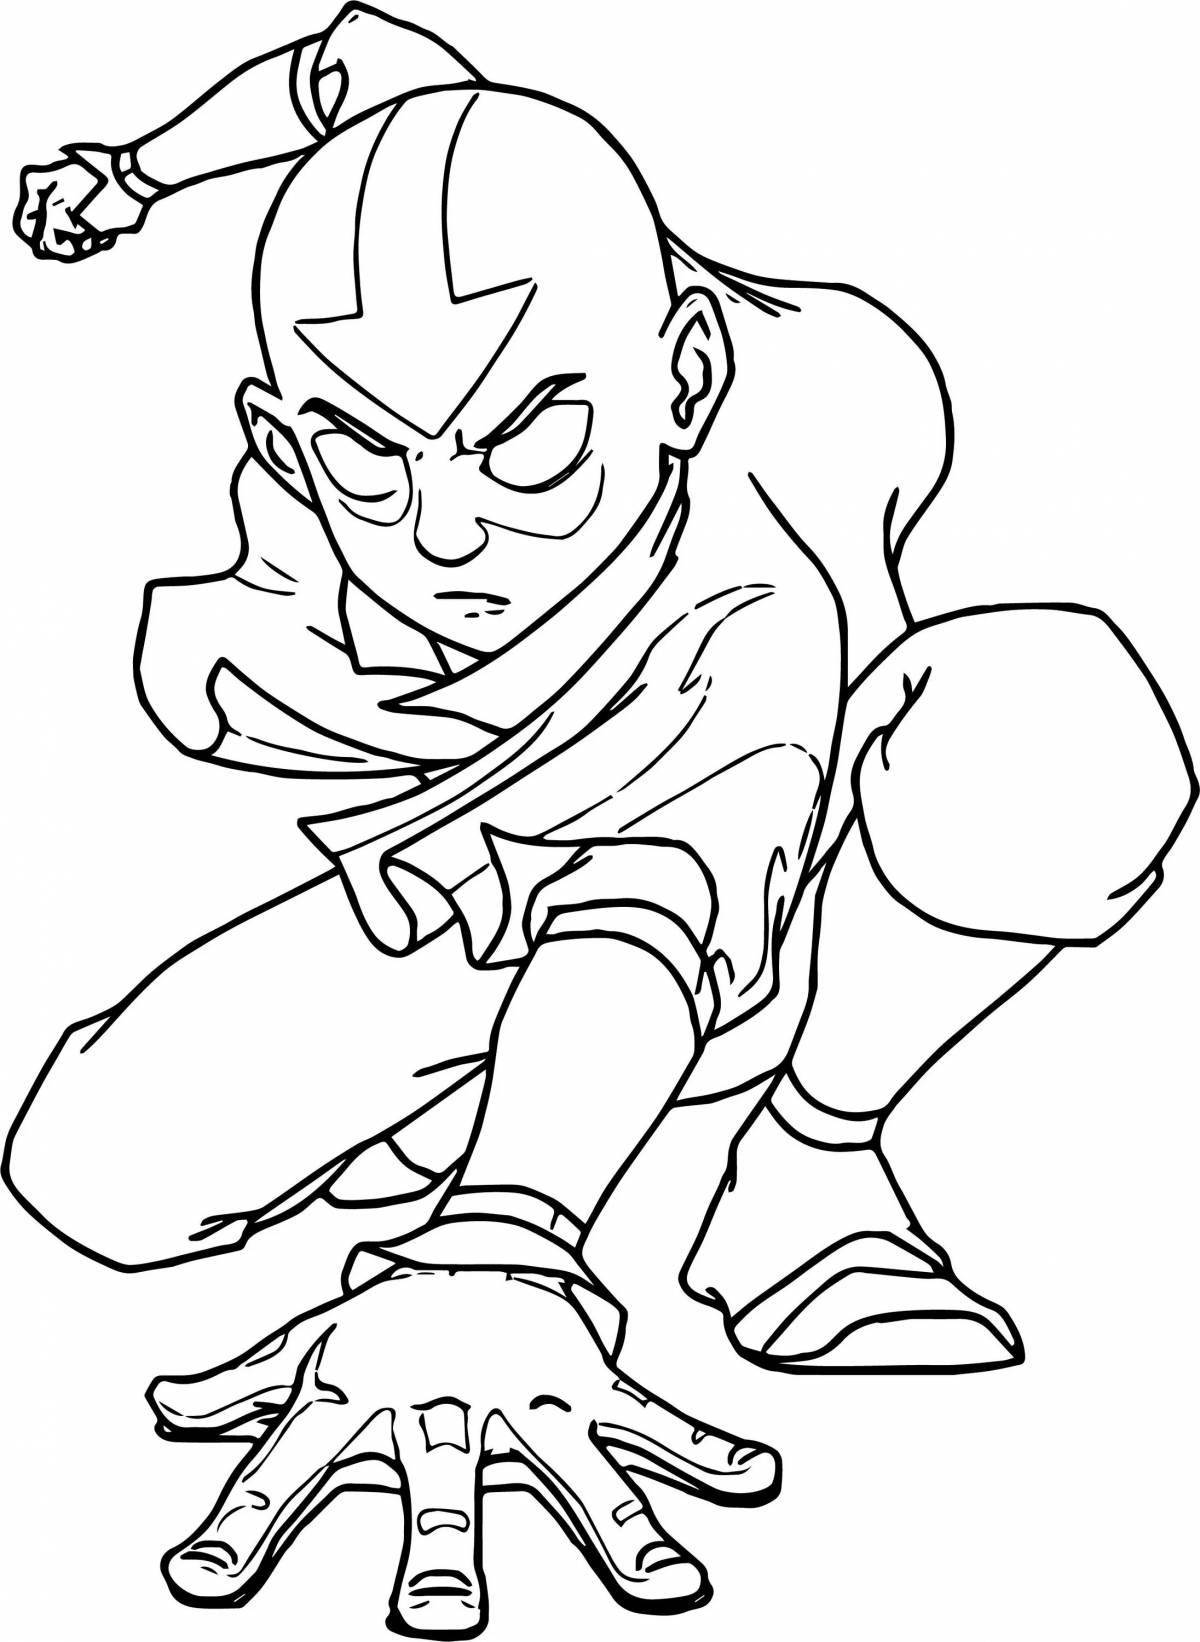 Aang's bright coloring page